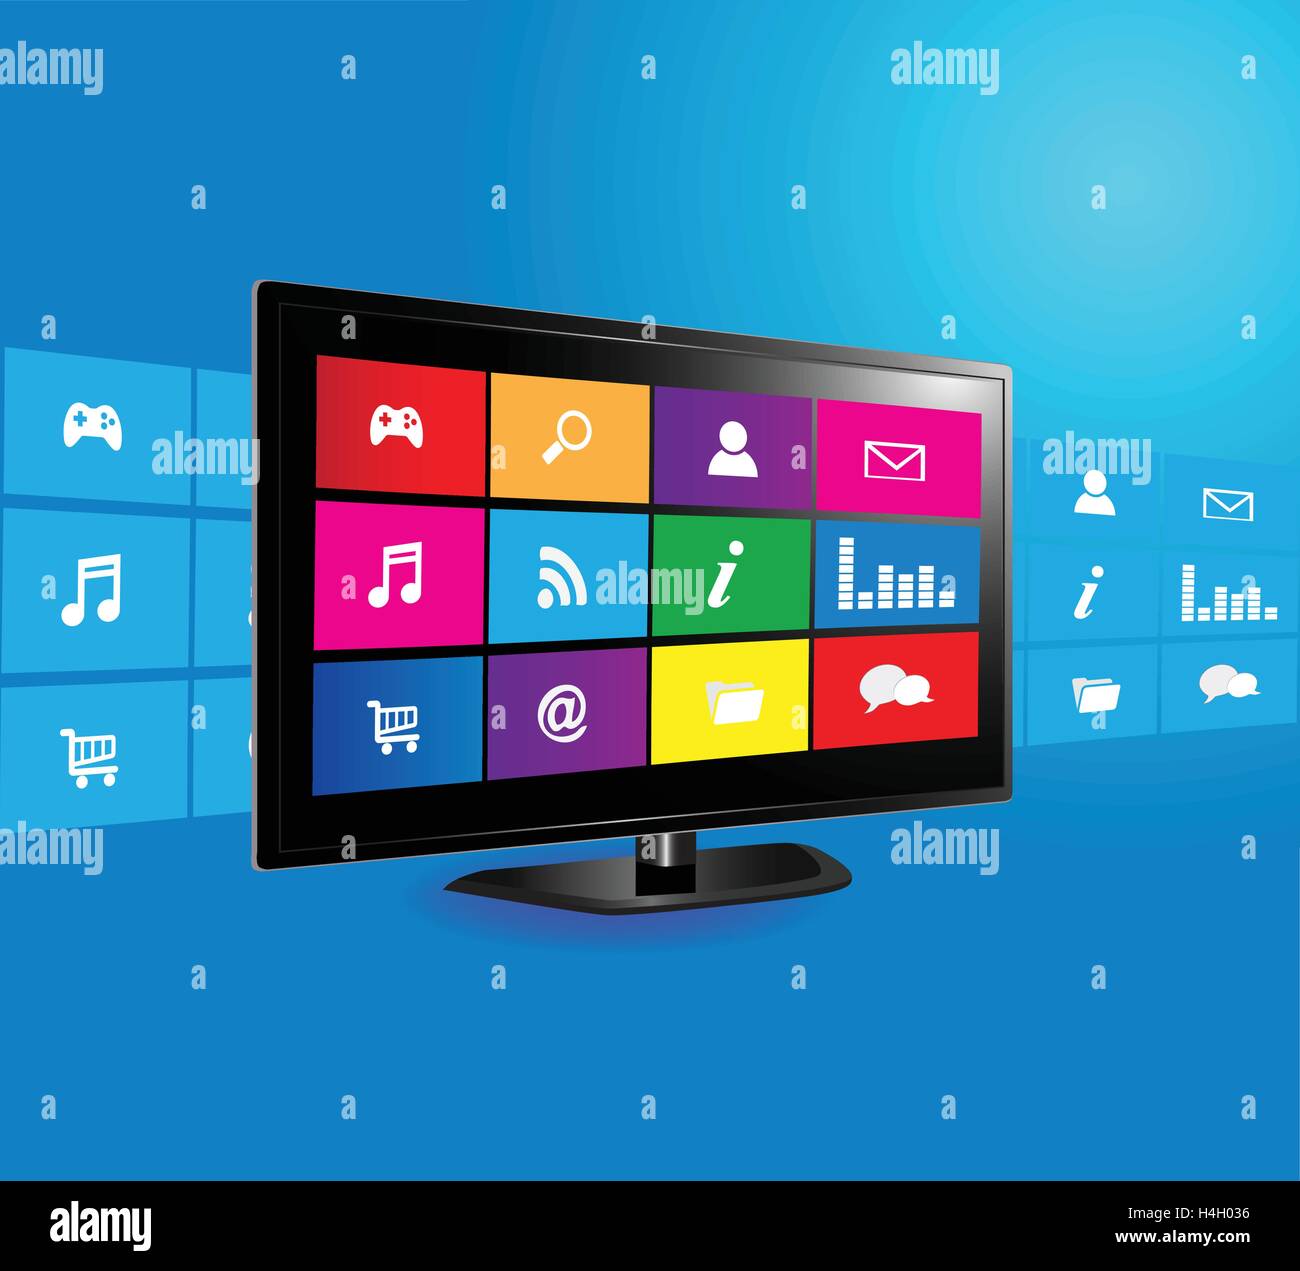 Internet television concept: colorful application icons on blue background Stock Vector